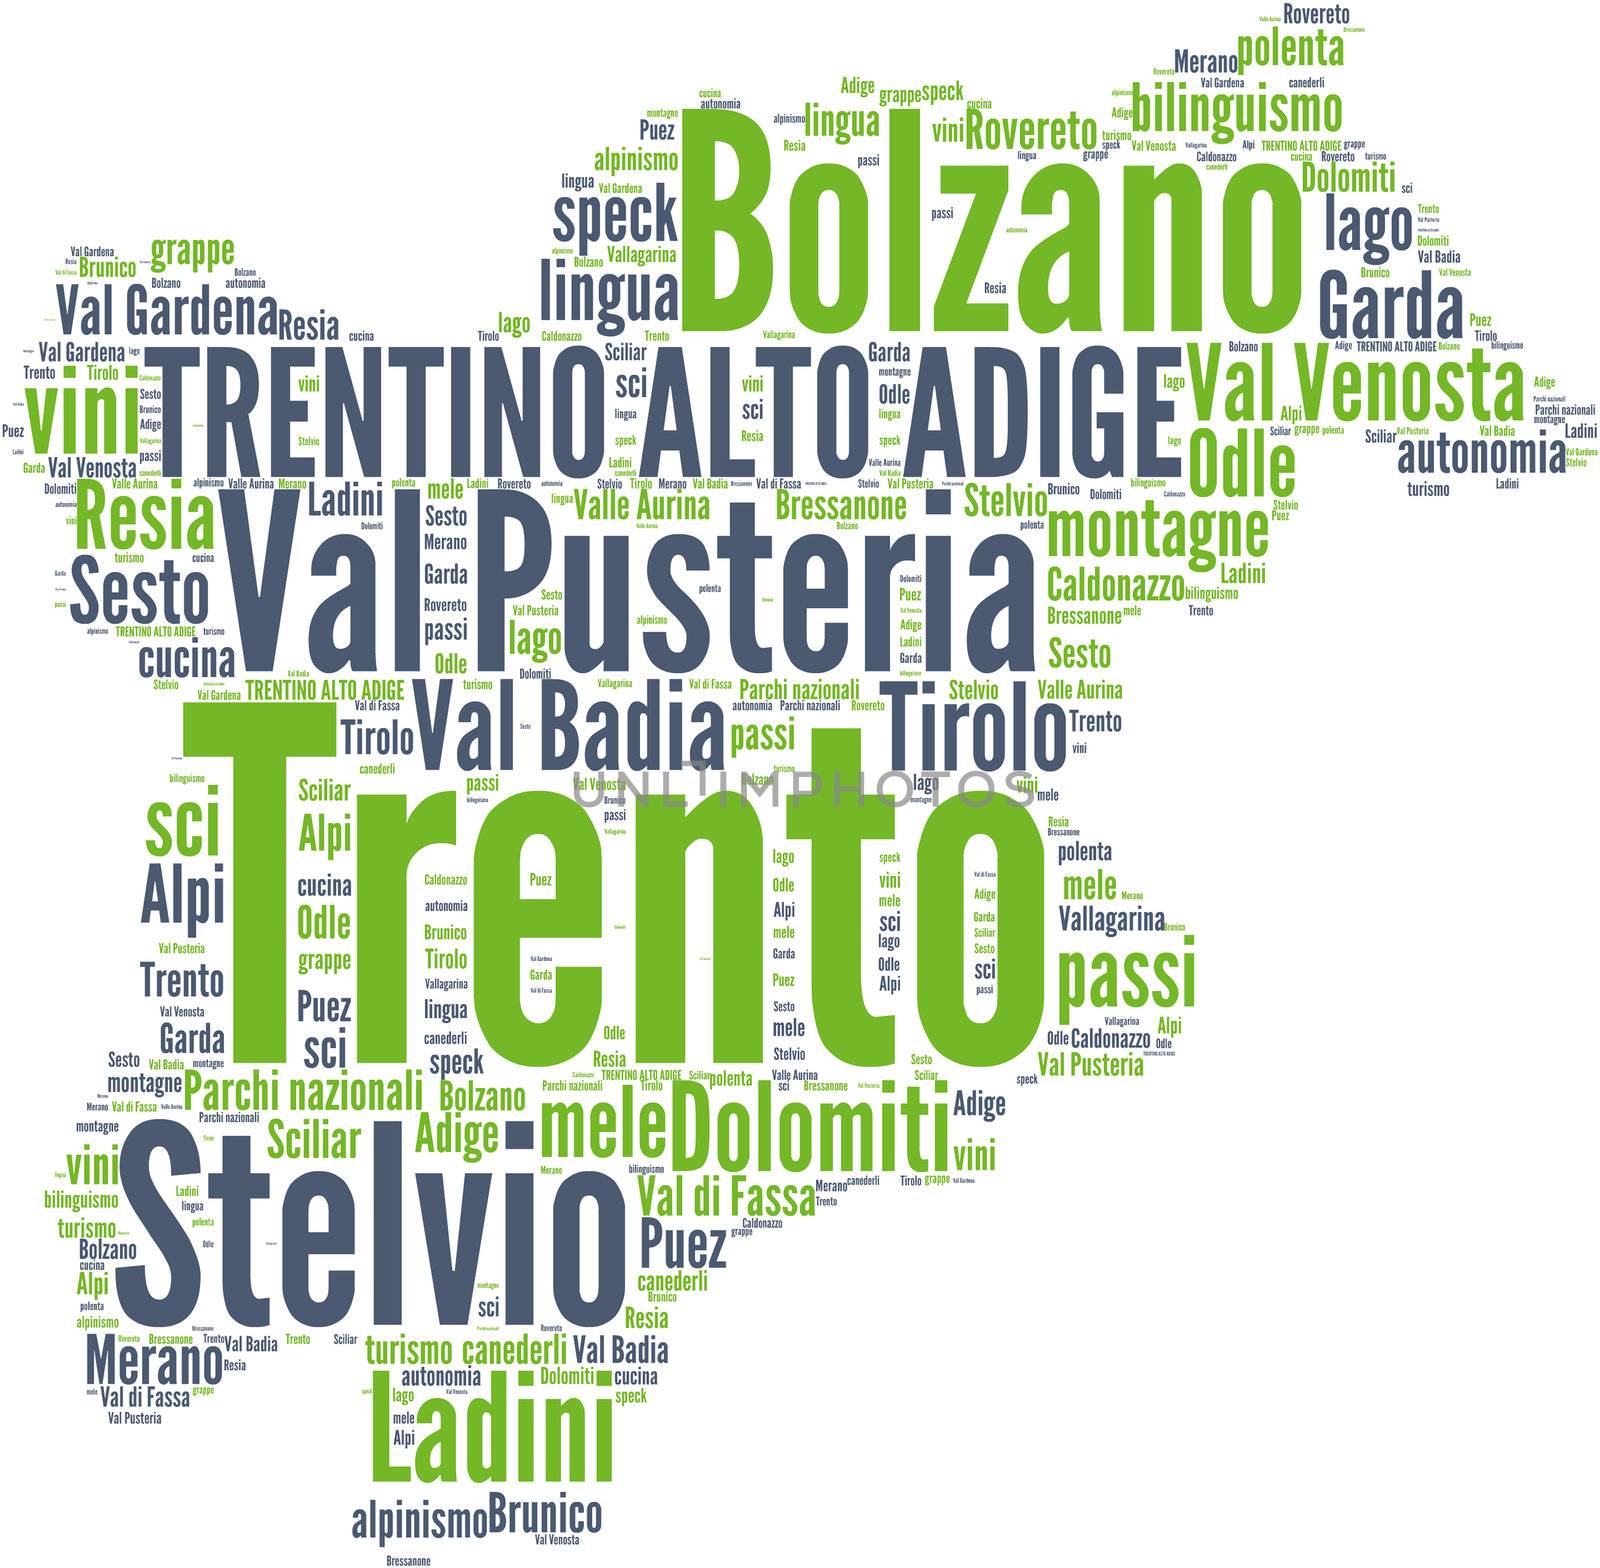 Italy regions word cloud illustration - part of a set